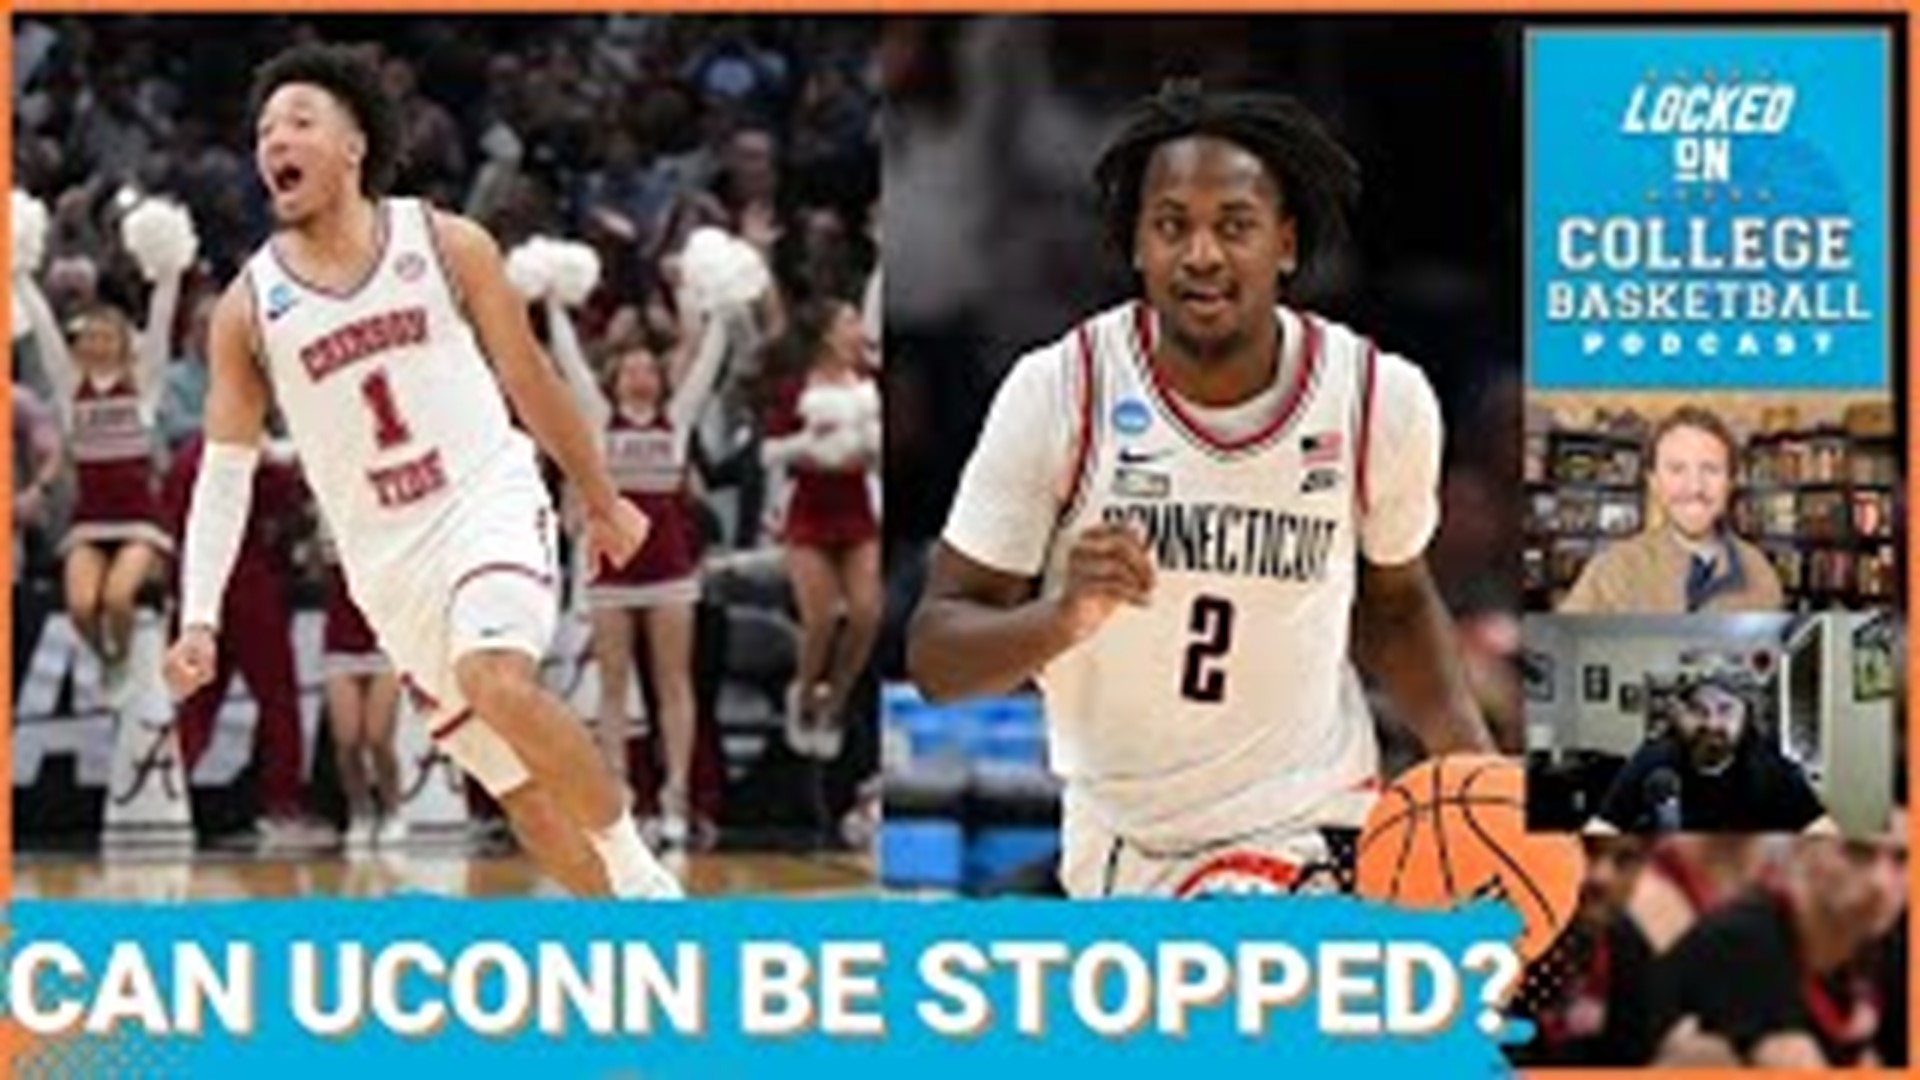 The UConn Huskies are vying to repeat as college basketball national champions, which has not happened since the Florida Gators did it back in 2006 and 2007.